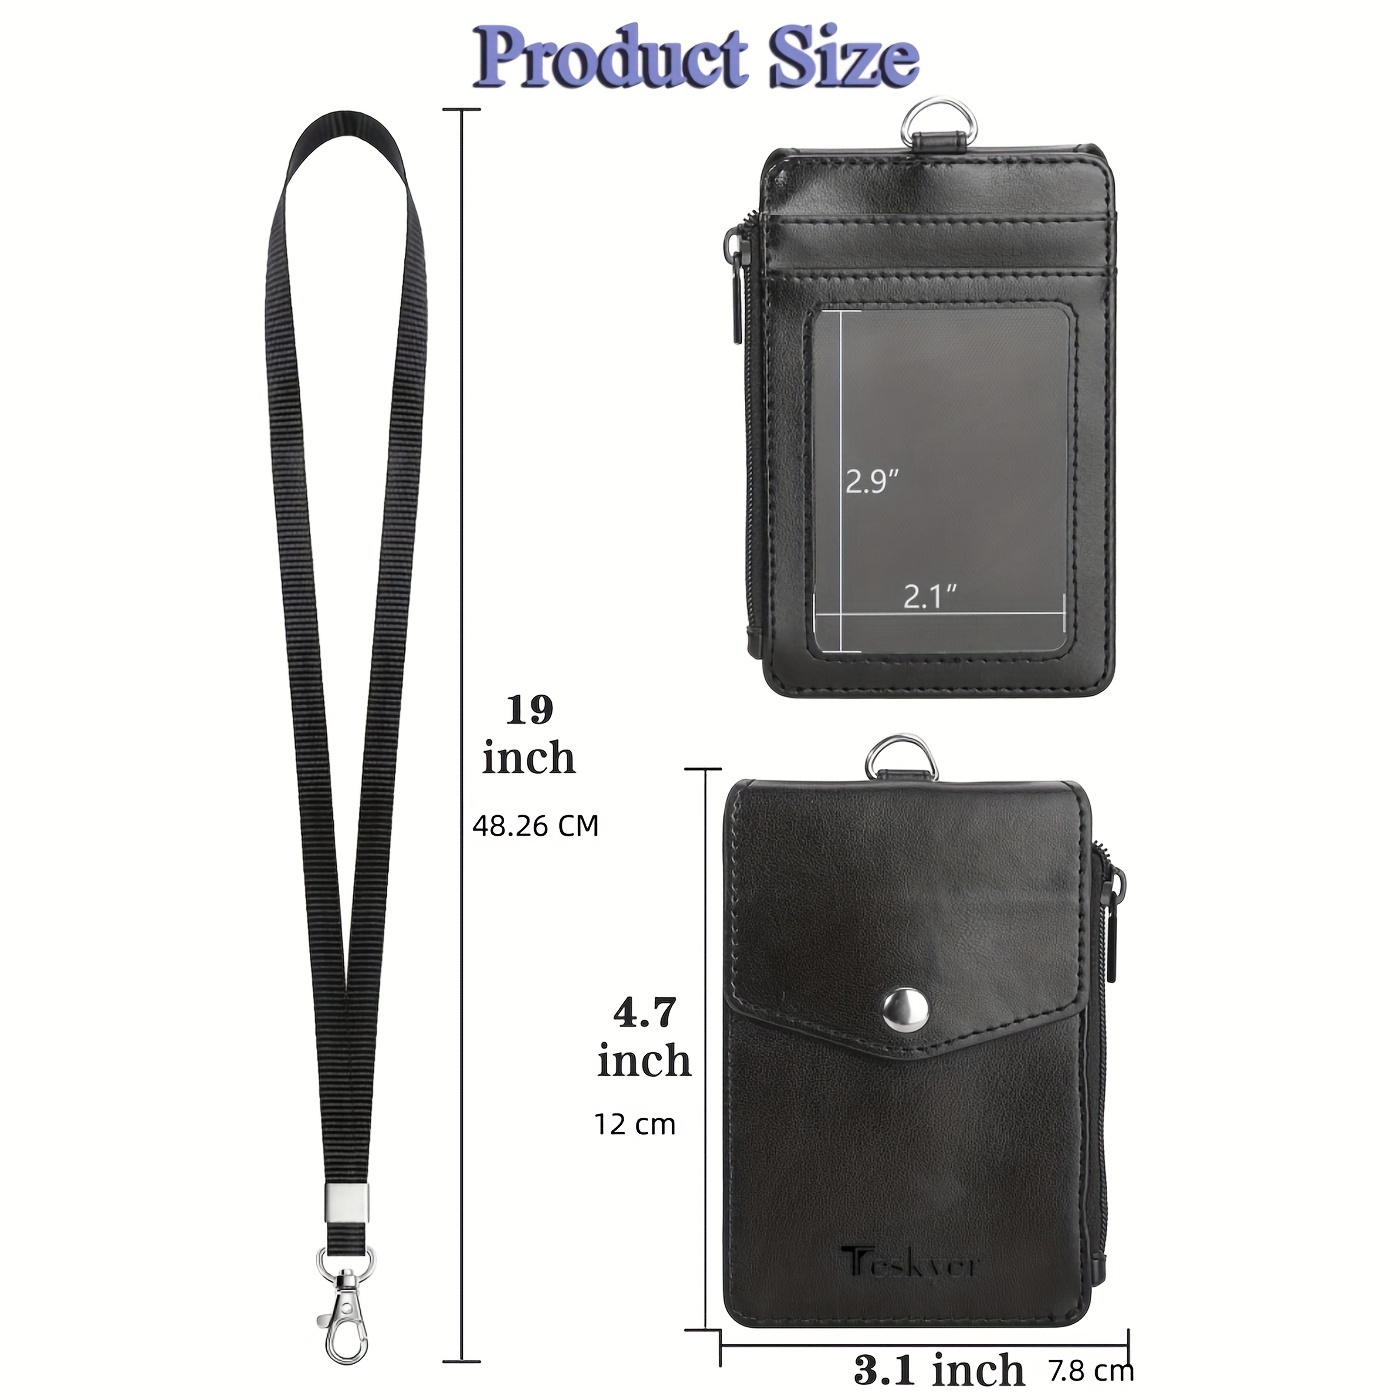 Life-Mate Badge Holder - Leather ID Card Holder Wallet Case with 3 Cards Slot and Neck Lanyard/Strap. Additional Retractable Badge Reel with Belt